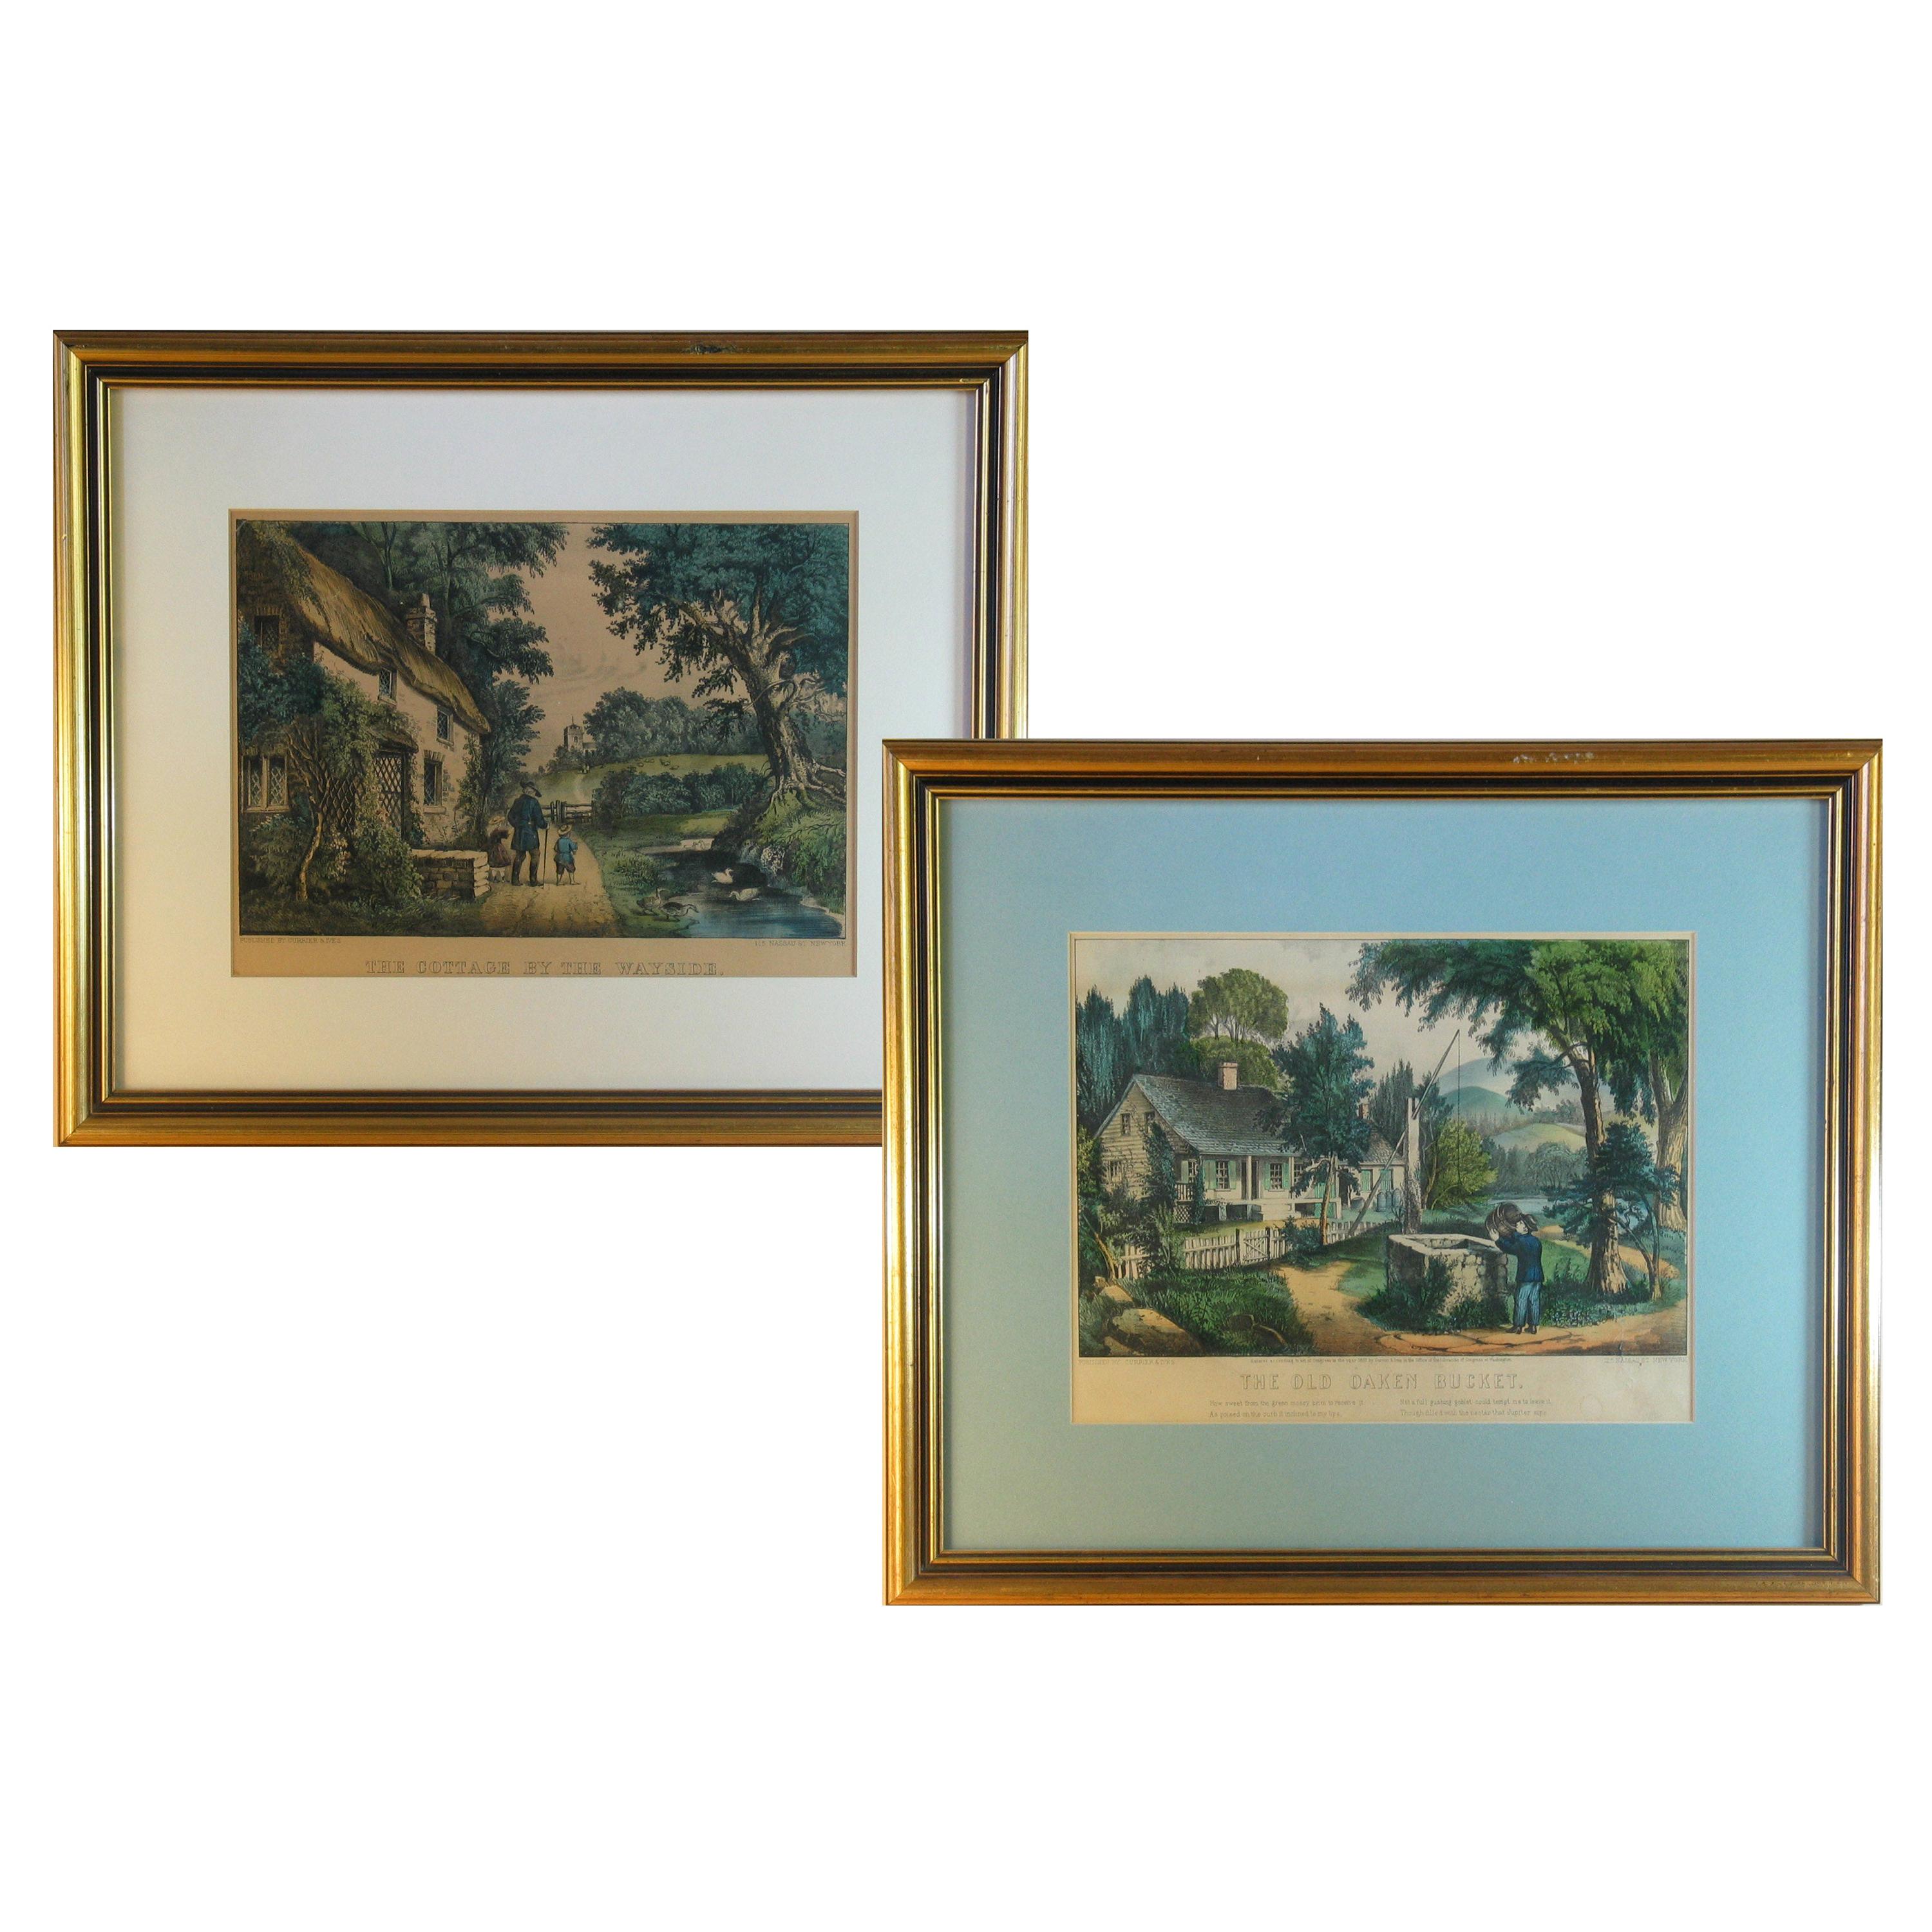 Pair of Currier & Ives Hand Colored Lithographs